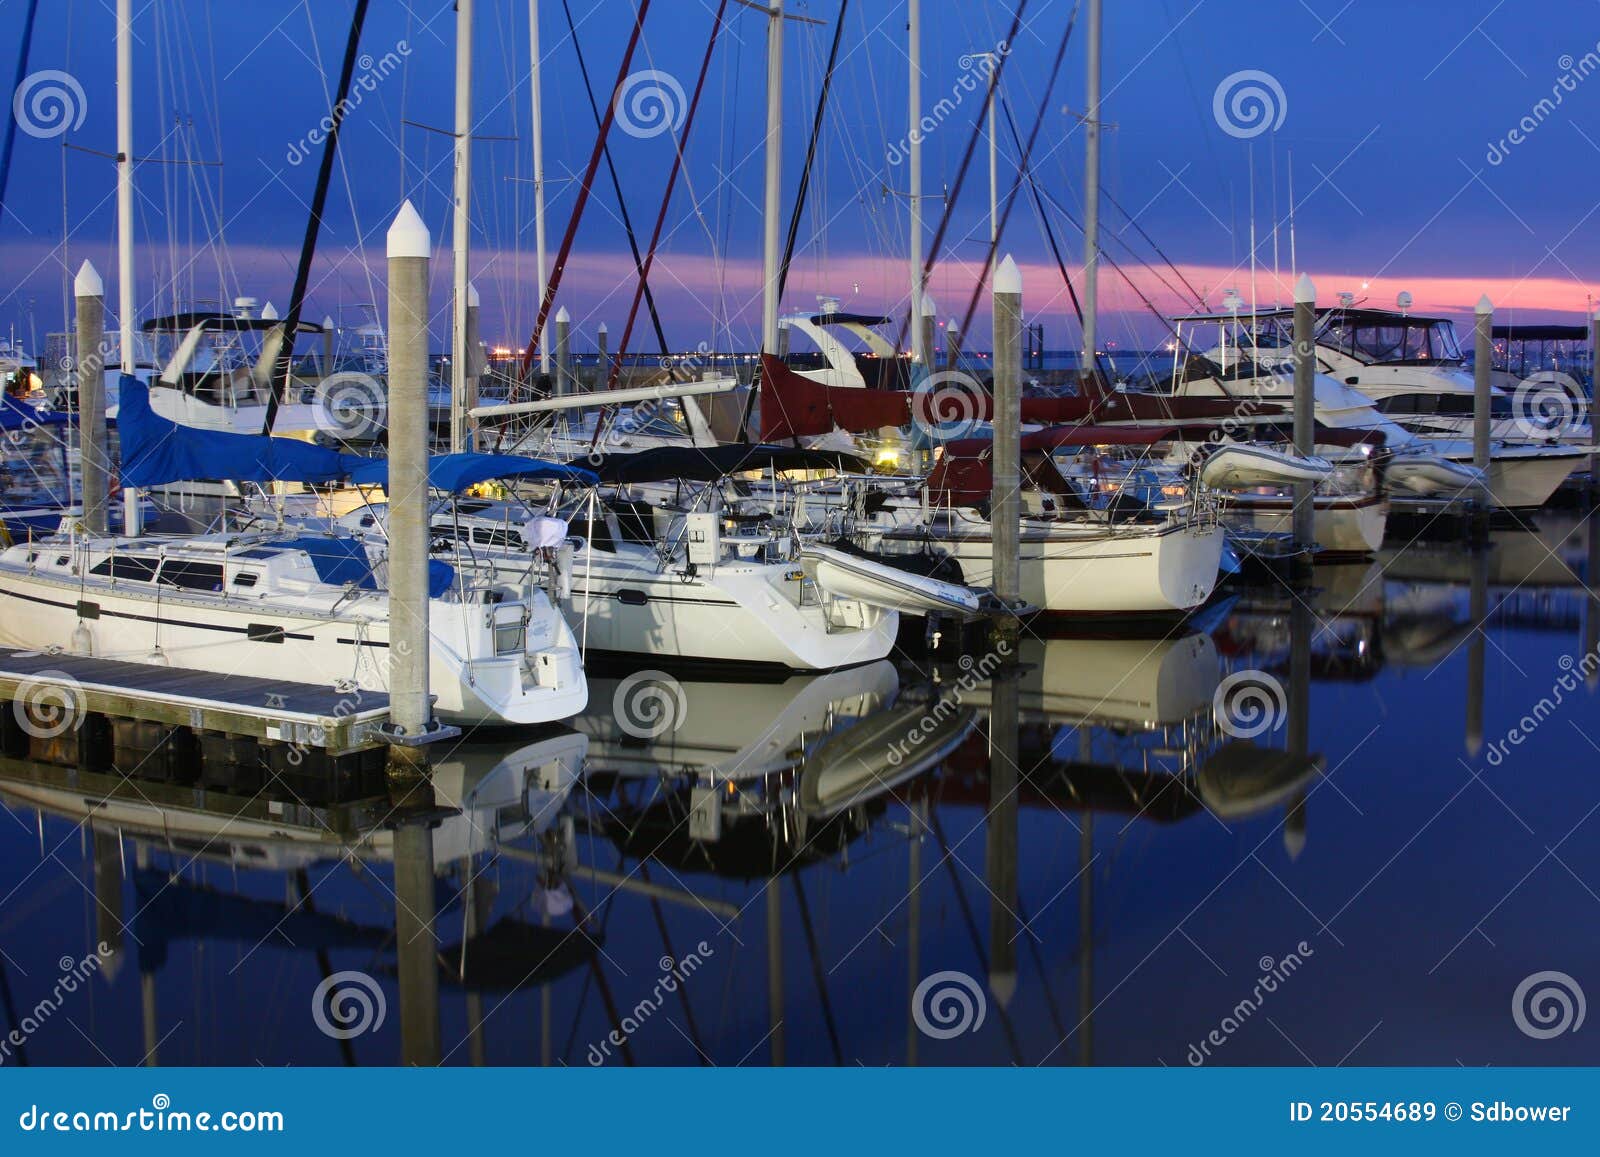 Yacht and Sailboats in the Marina at Sunset Stock Image - Image of ...